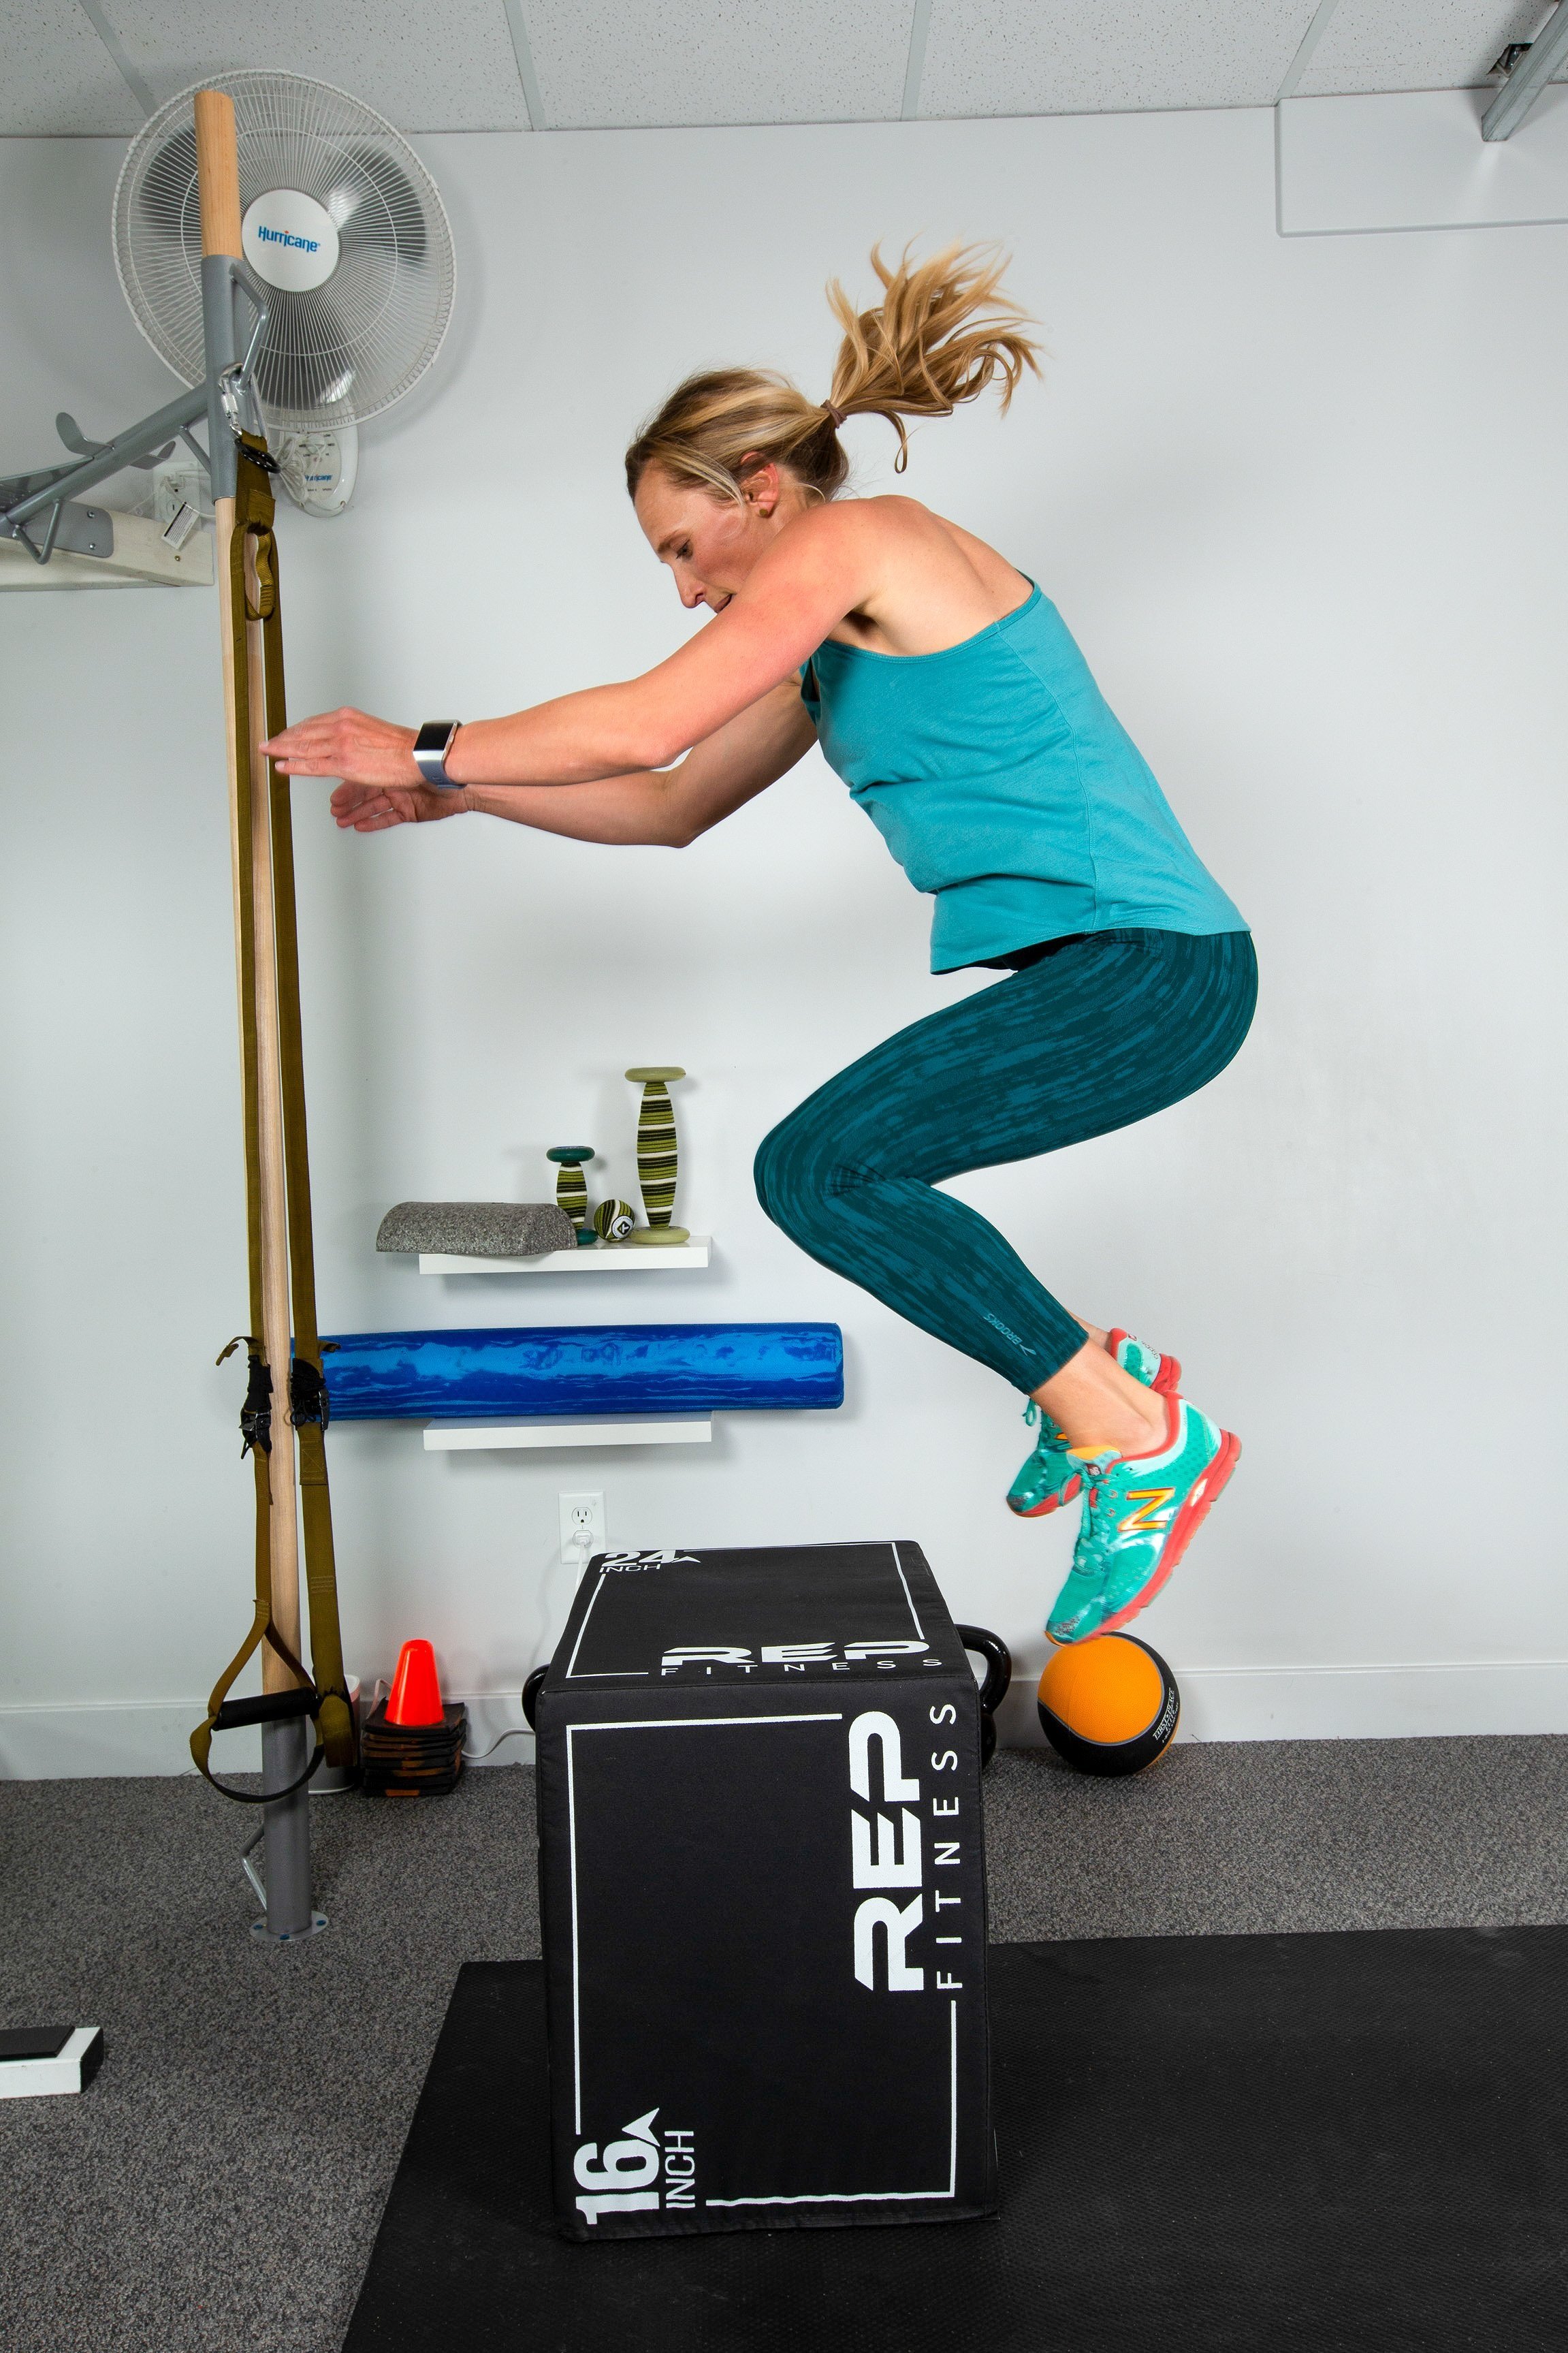 Plyometric training: jumping and skipping exercises can help improve  strength and fitness